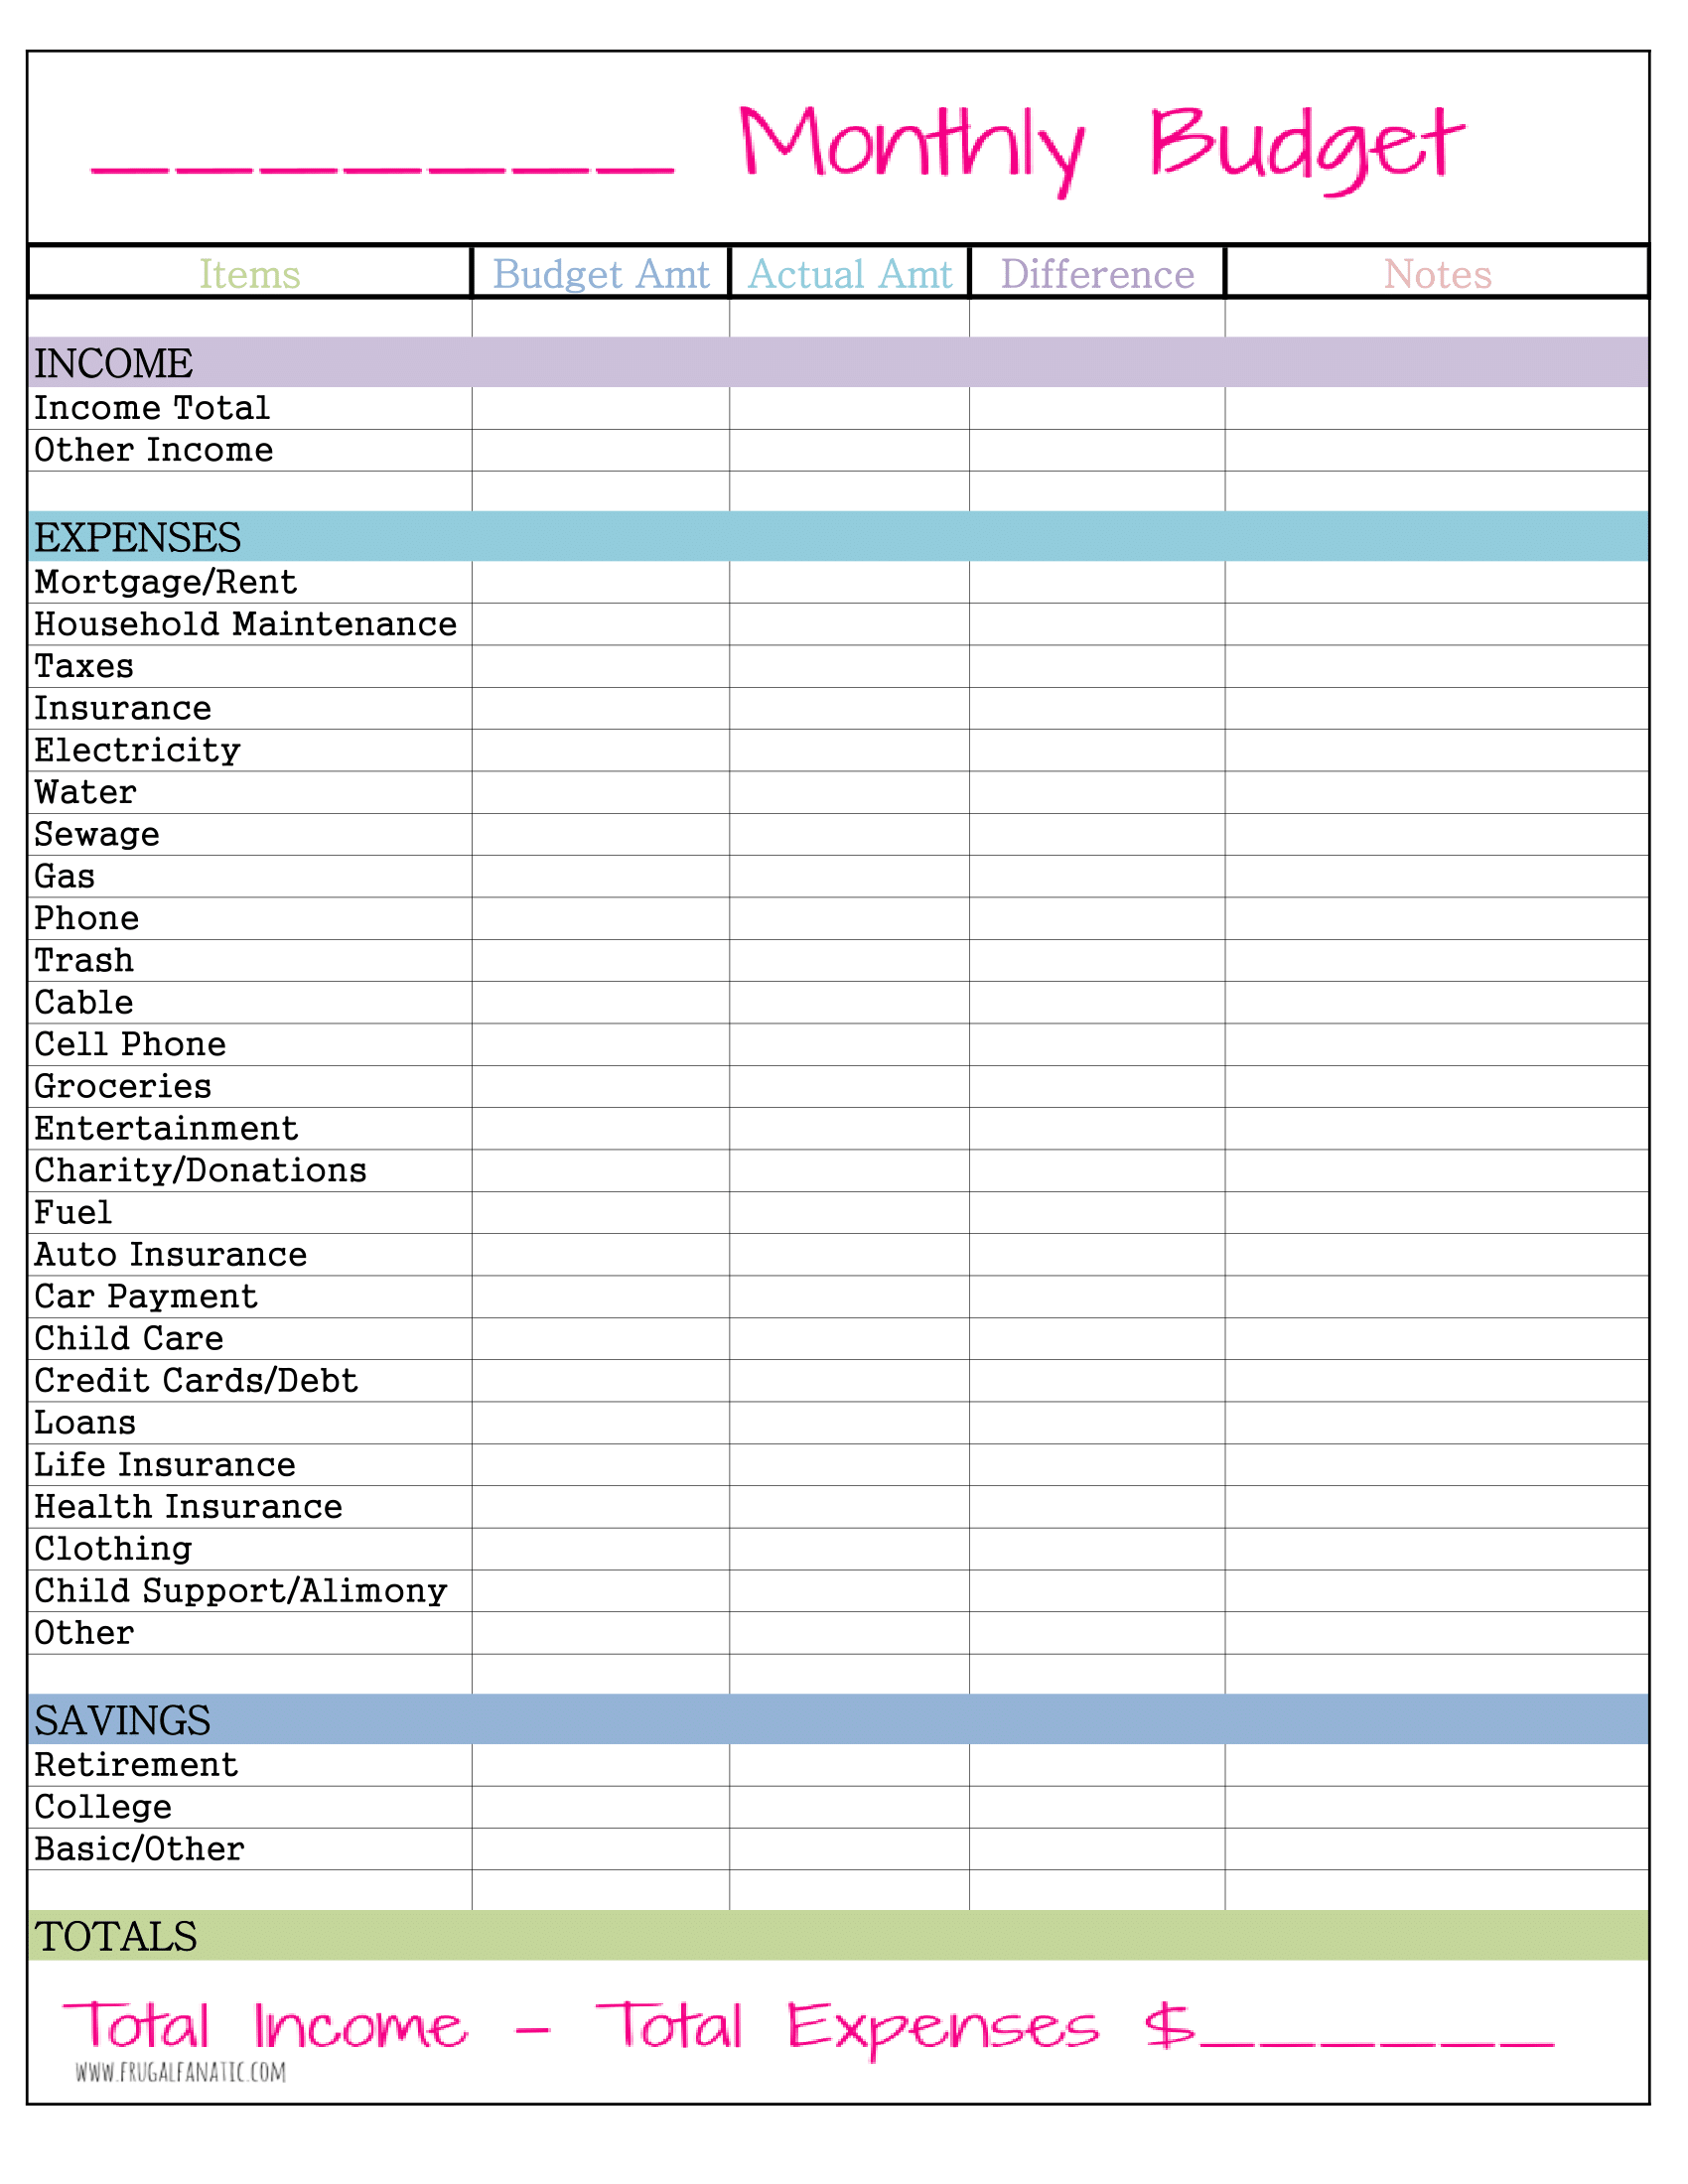 Monthly Budget Planner Form Download FREE Template